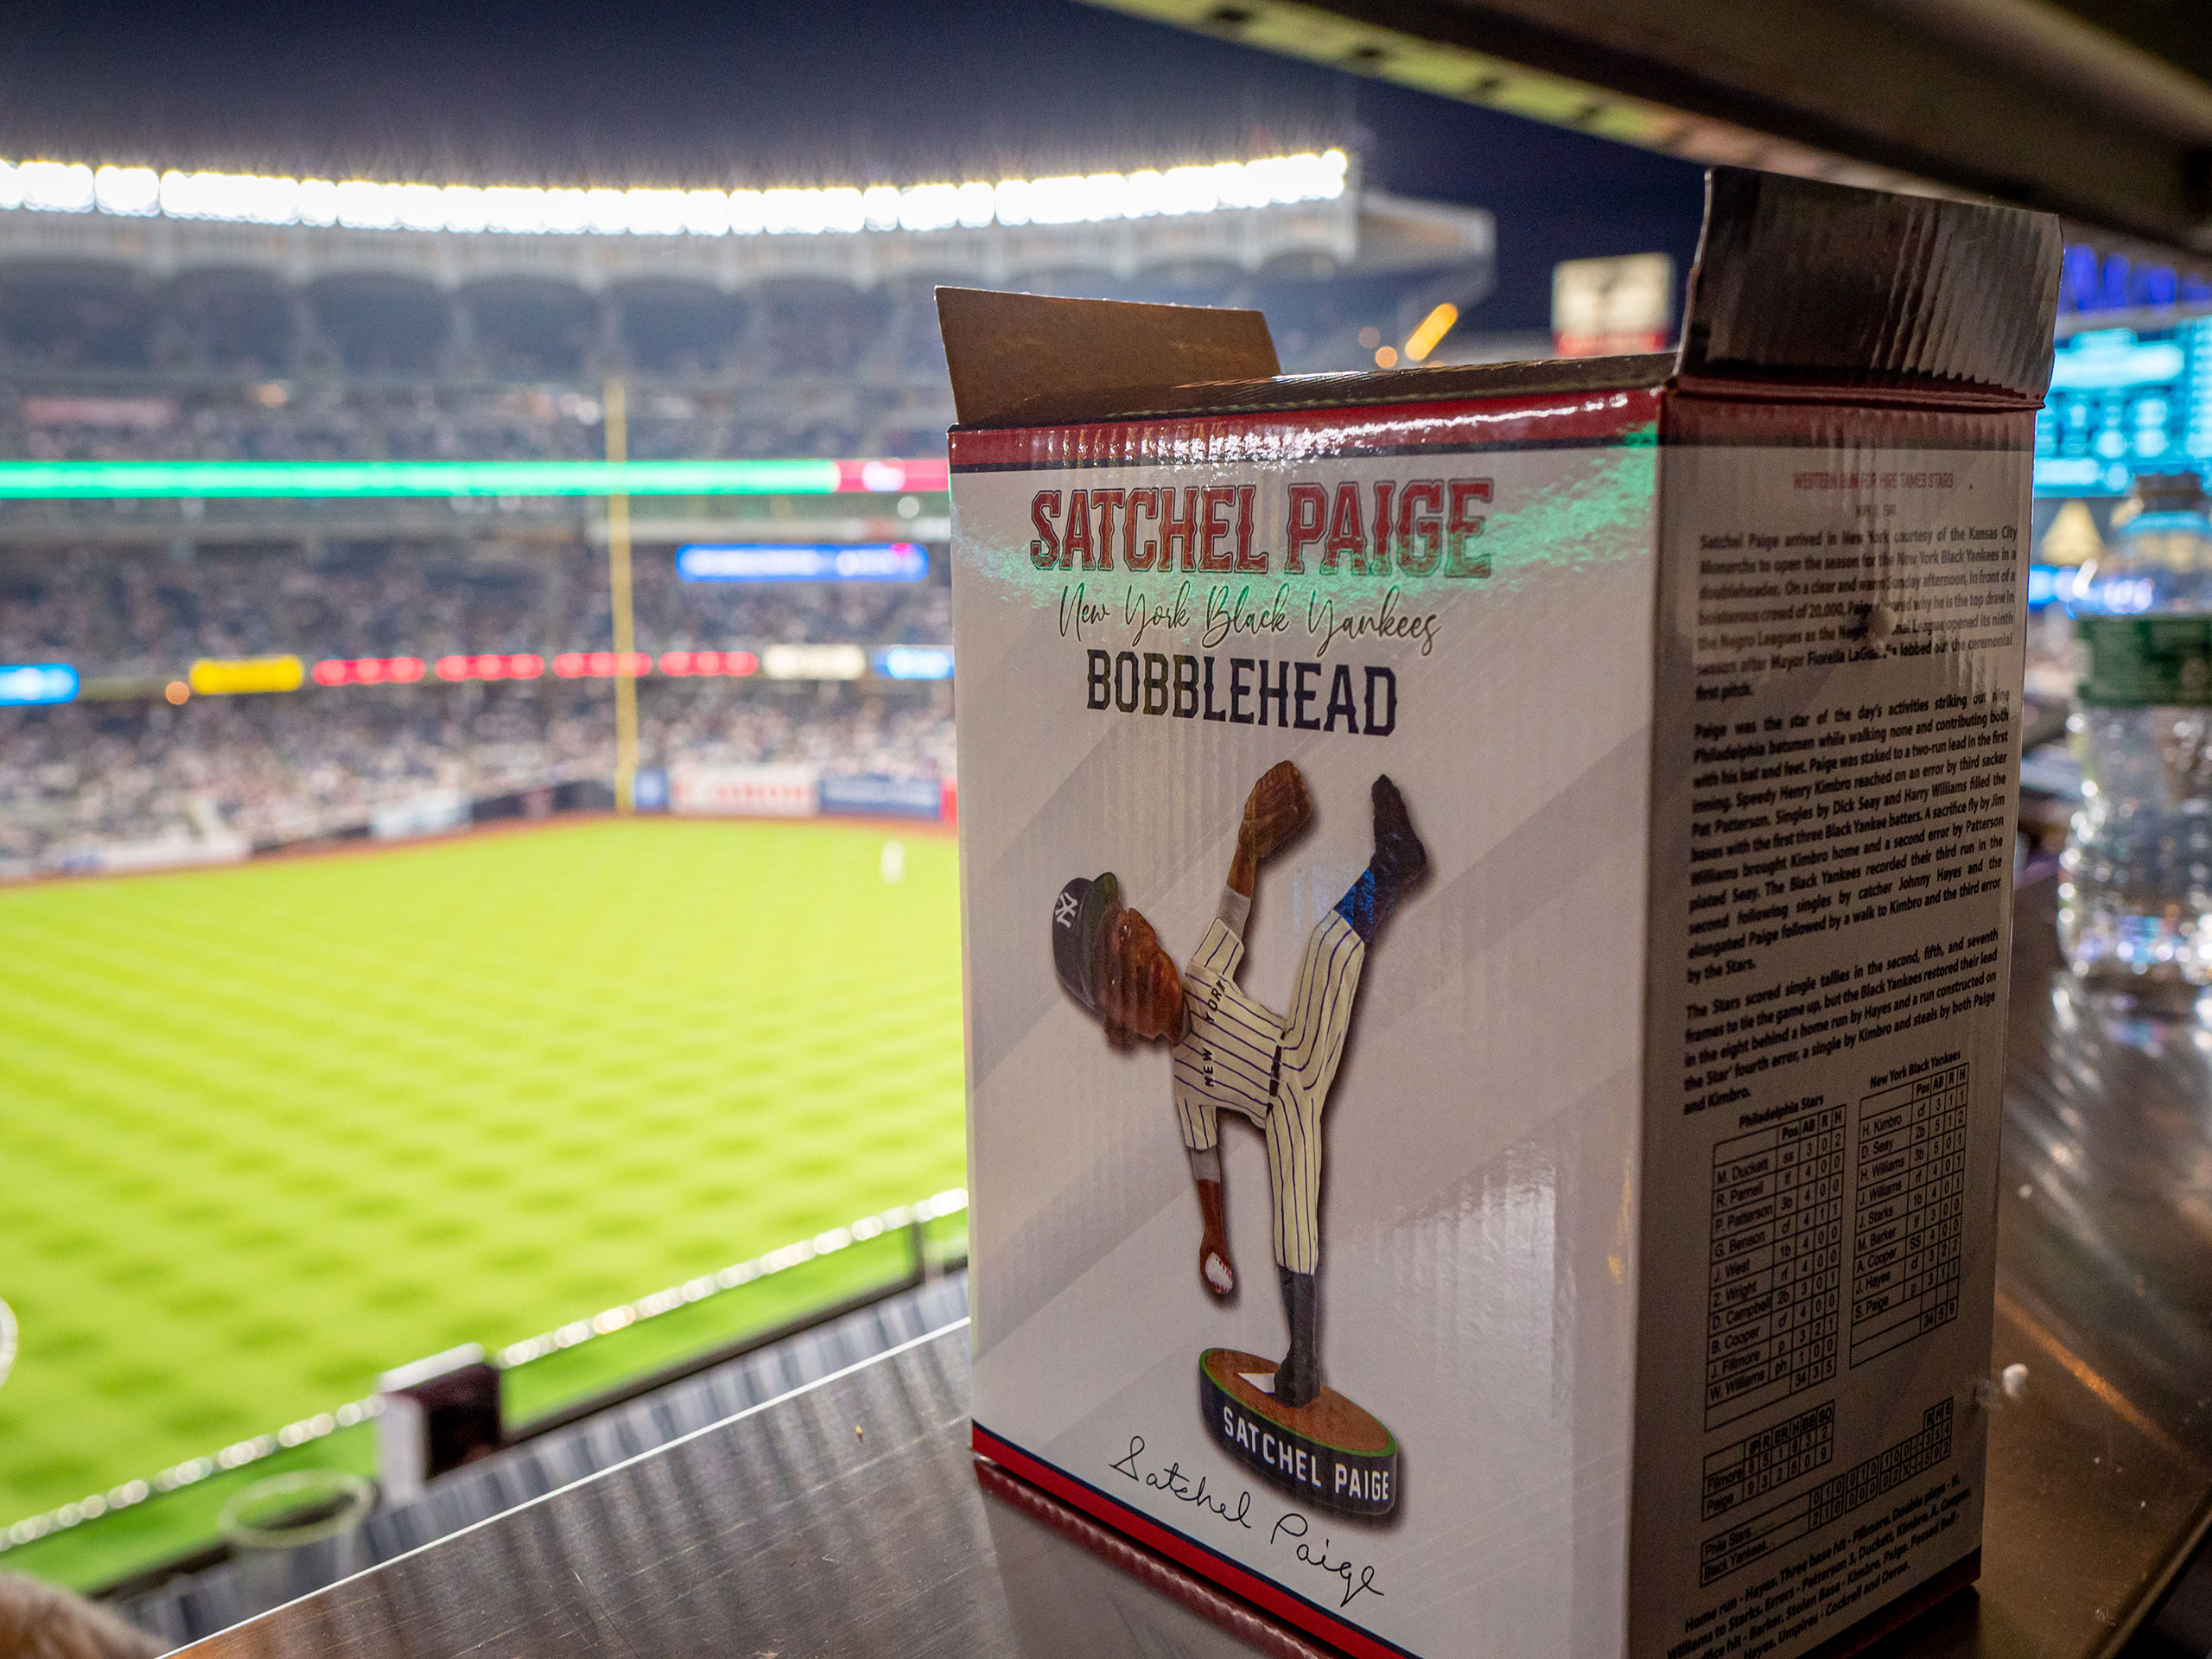 A box with a Satchel Paige bobblehead with a baseball field in the background.